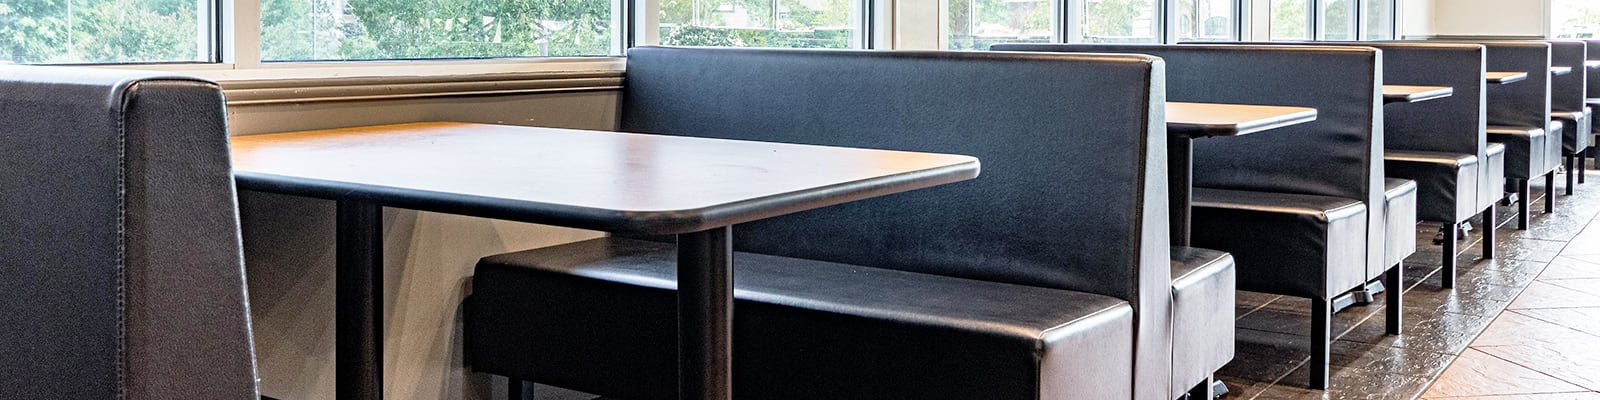 2 Crucial Features to consider when looking for a restaurant booth, by  customrestaurant11